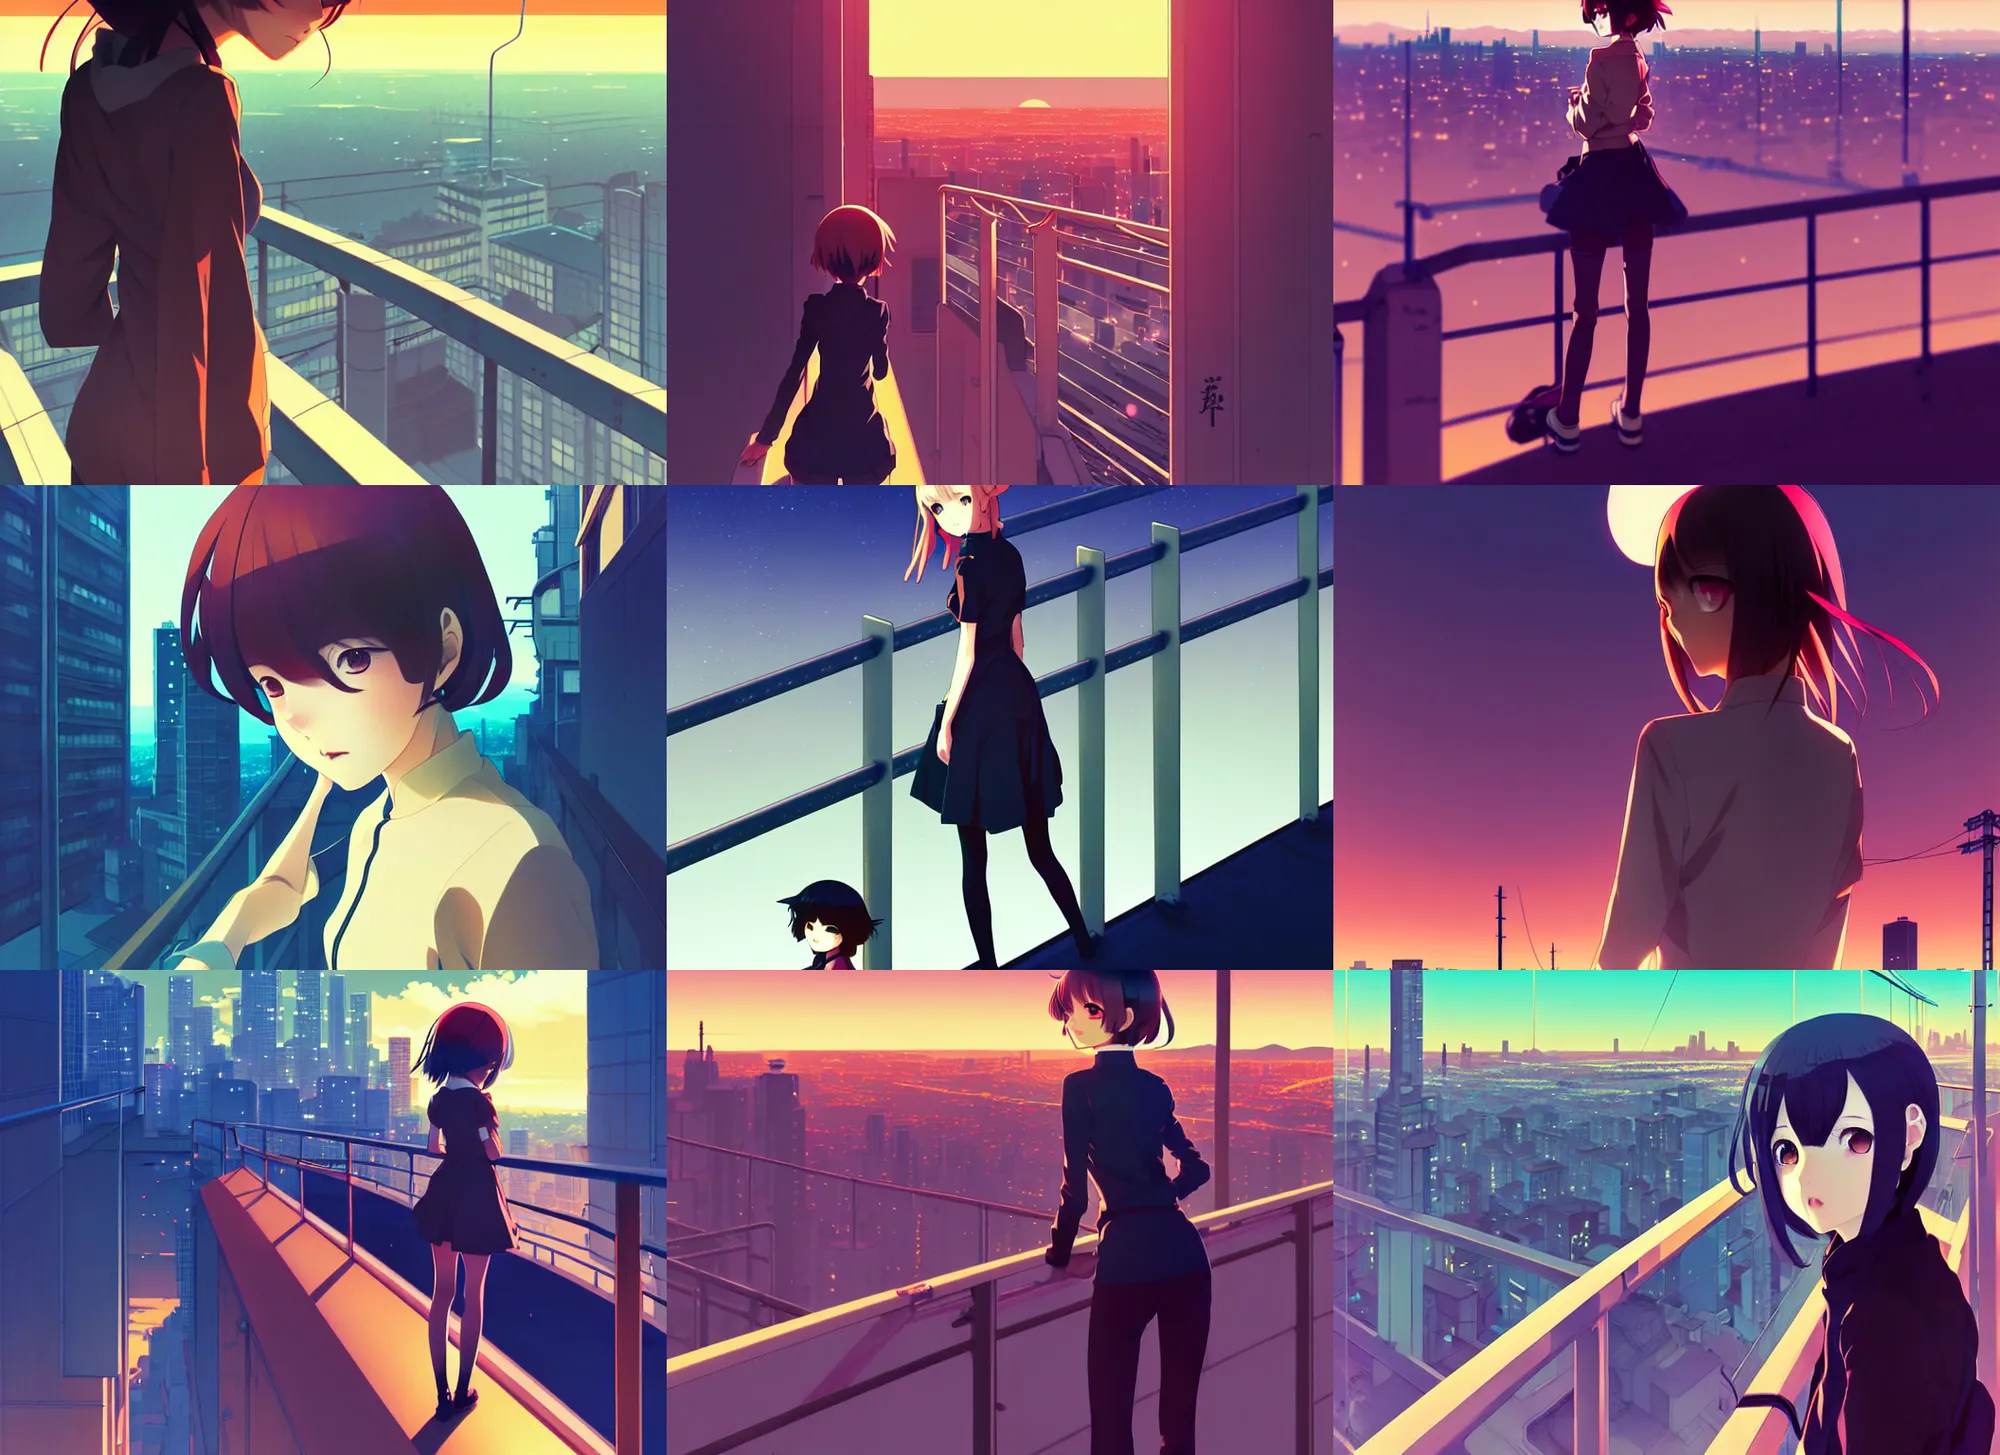 Prompt: anime visual, portrait of a young female traveler sight seeing above the city exterior, guardrails, dusk, very low light, cute face by ilya kuvshinov and yoh yoshinari, mucha, dynamic pose, dynamic perspective, strong silhouette, anime frames, rounded eyes, smooth facial features, strong contrasting shadows